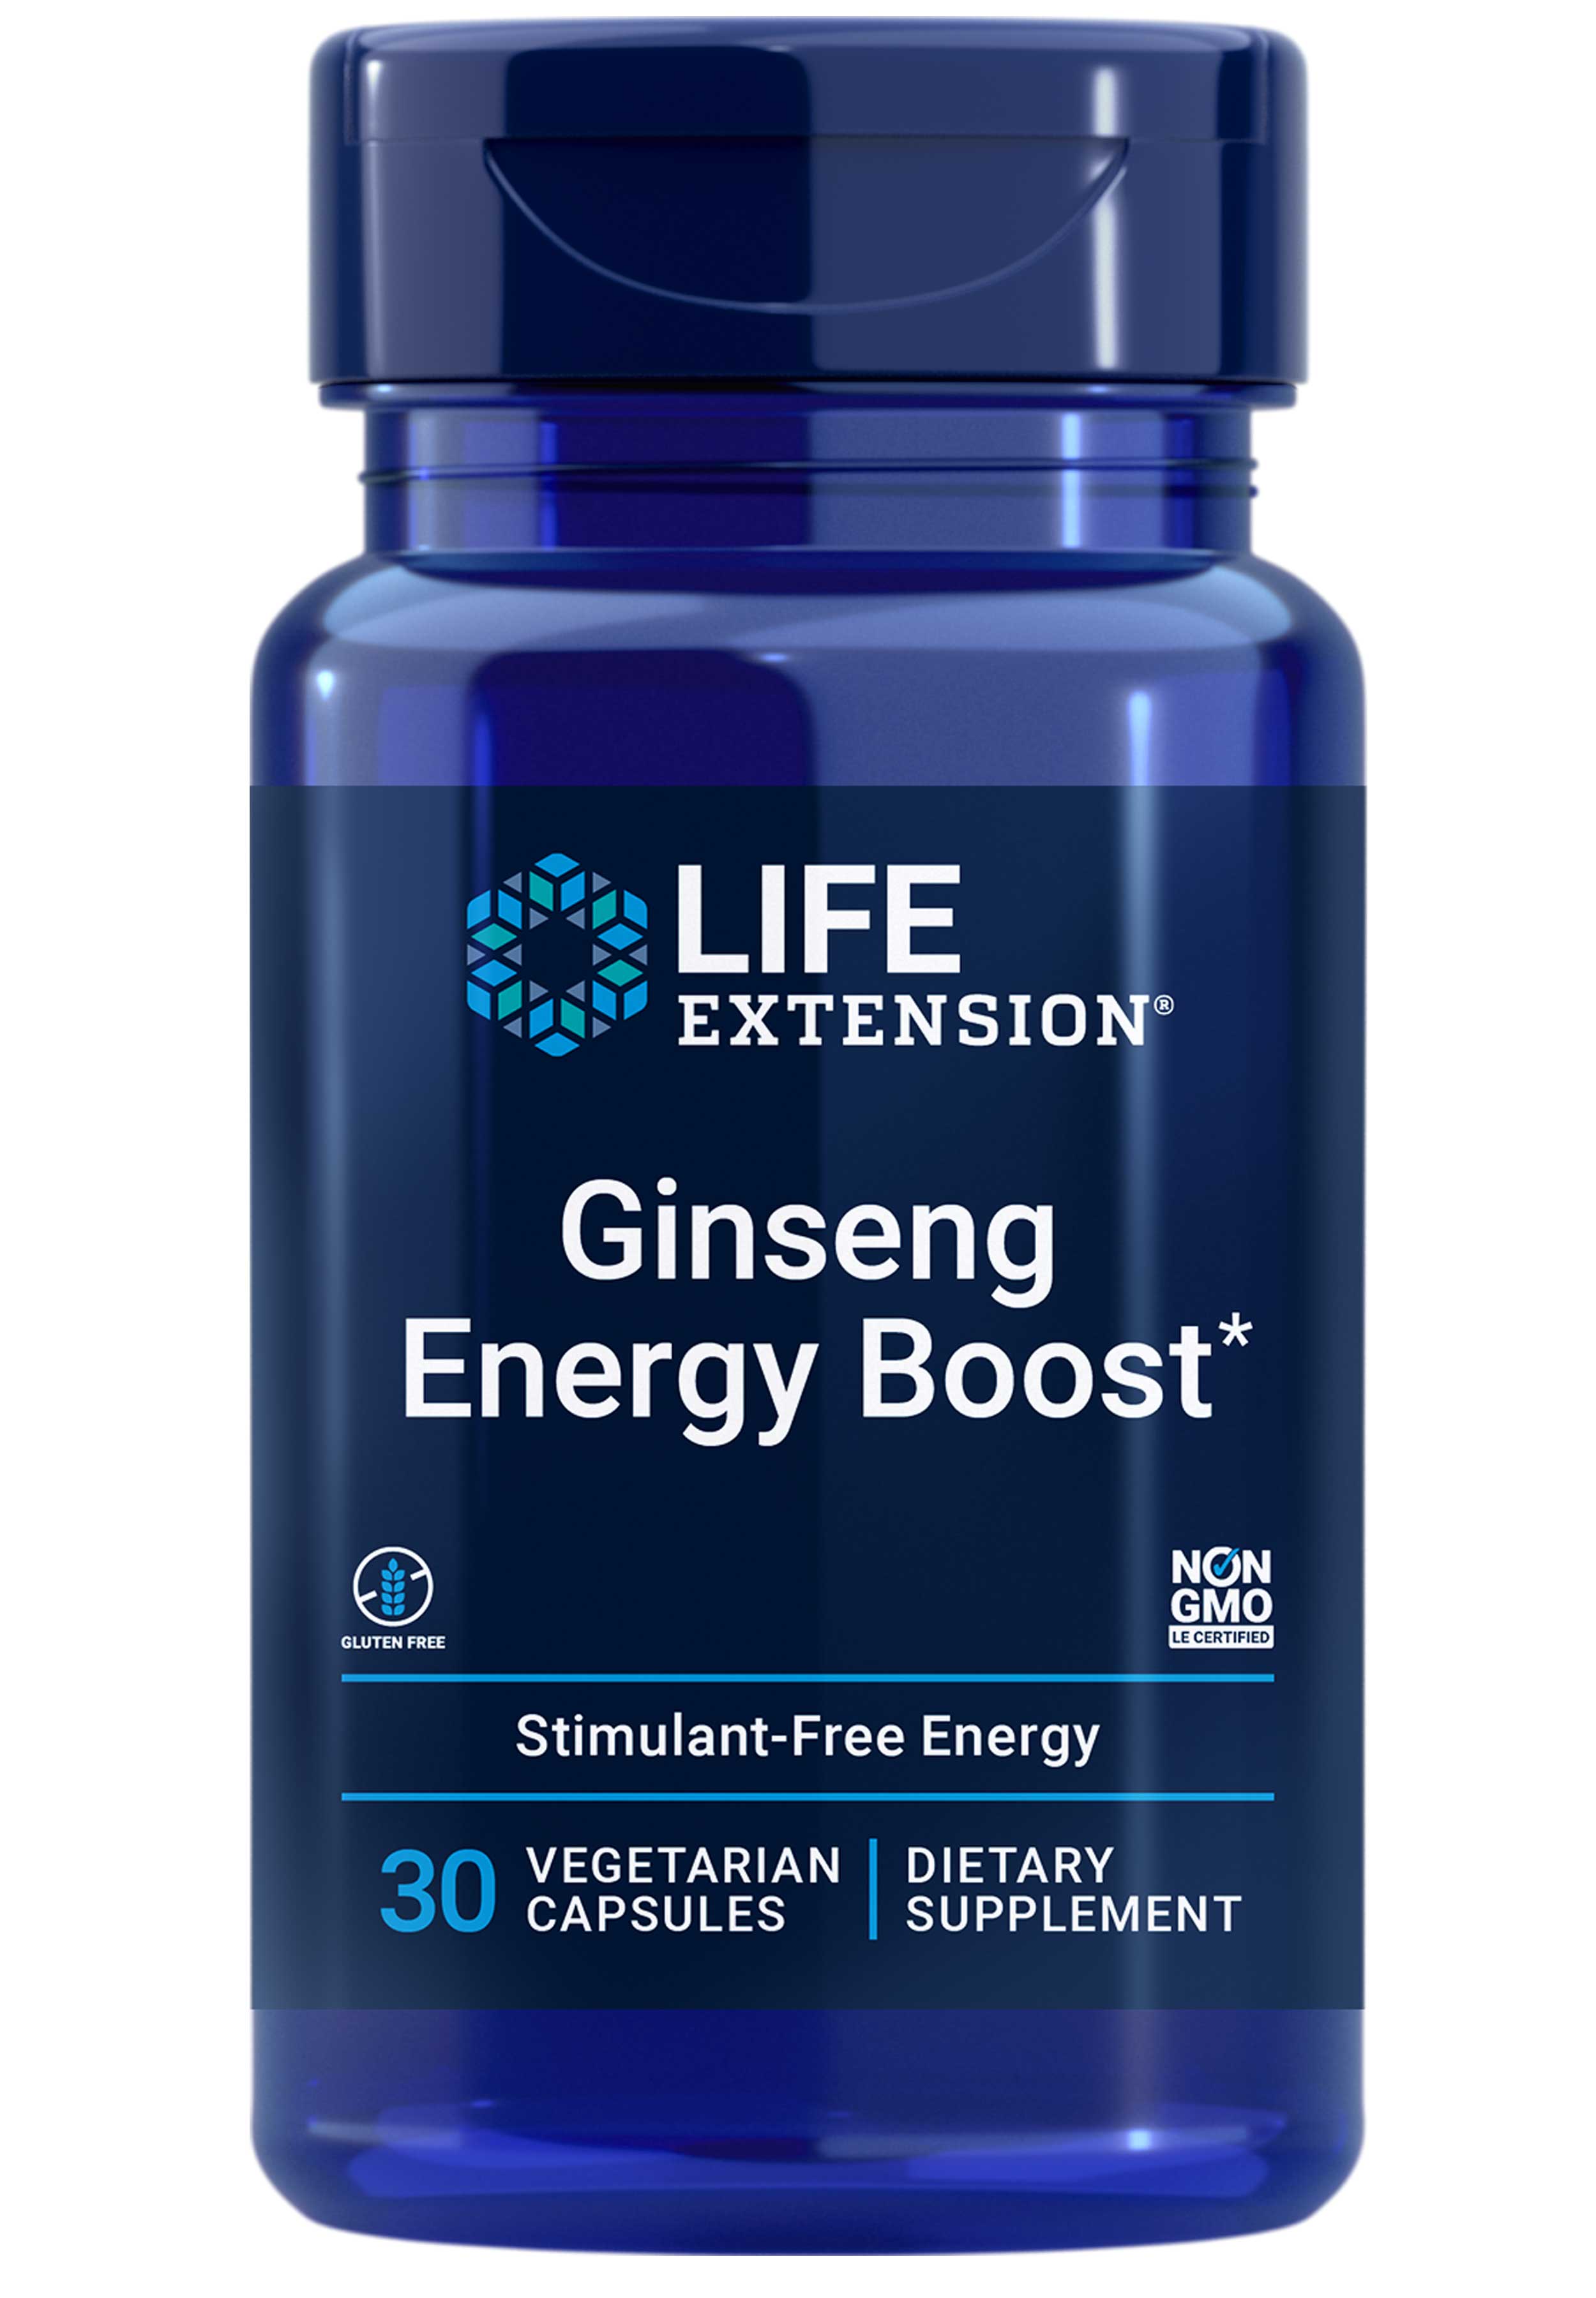 Life Extension Ginseng Energy Boost